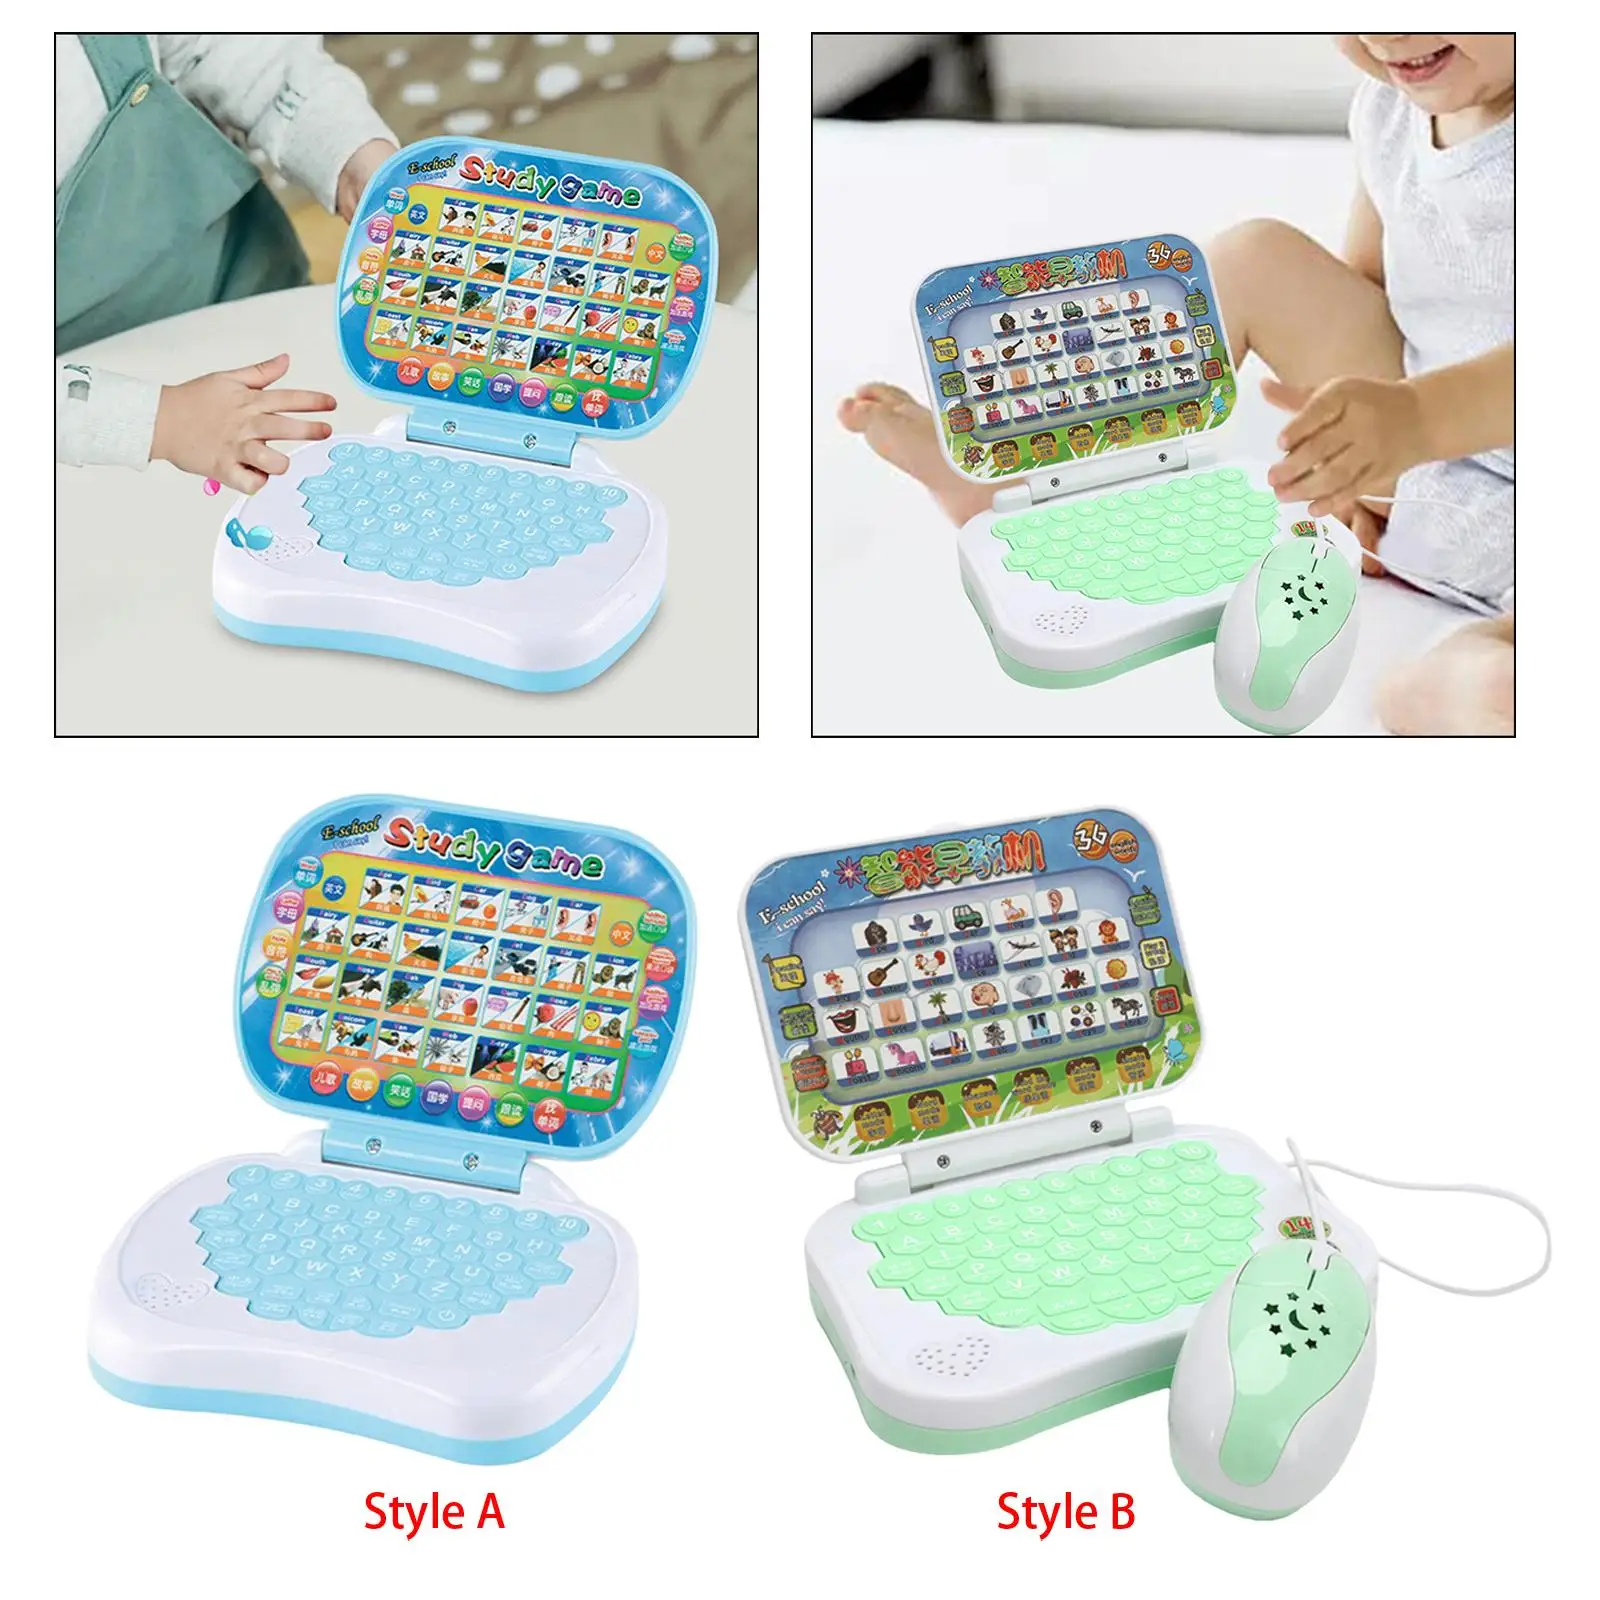 Multifunction Handheld Language Learning Machine Computer Child Interactive Learning Pad Tablet for Children Bithday Gifts